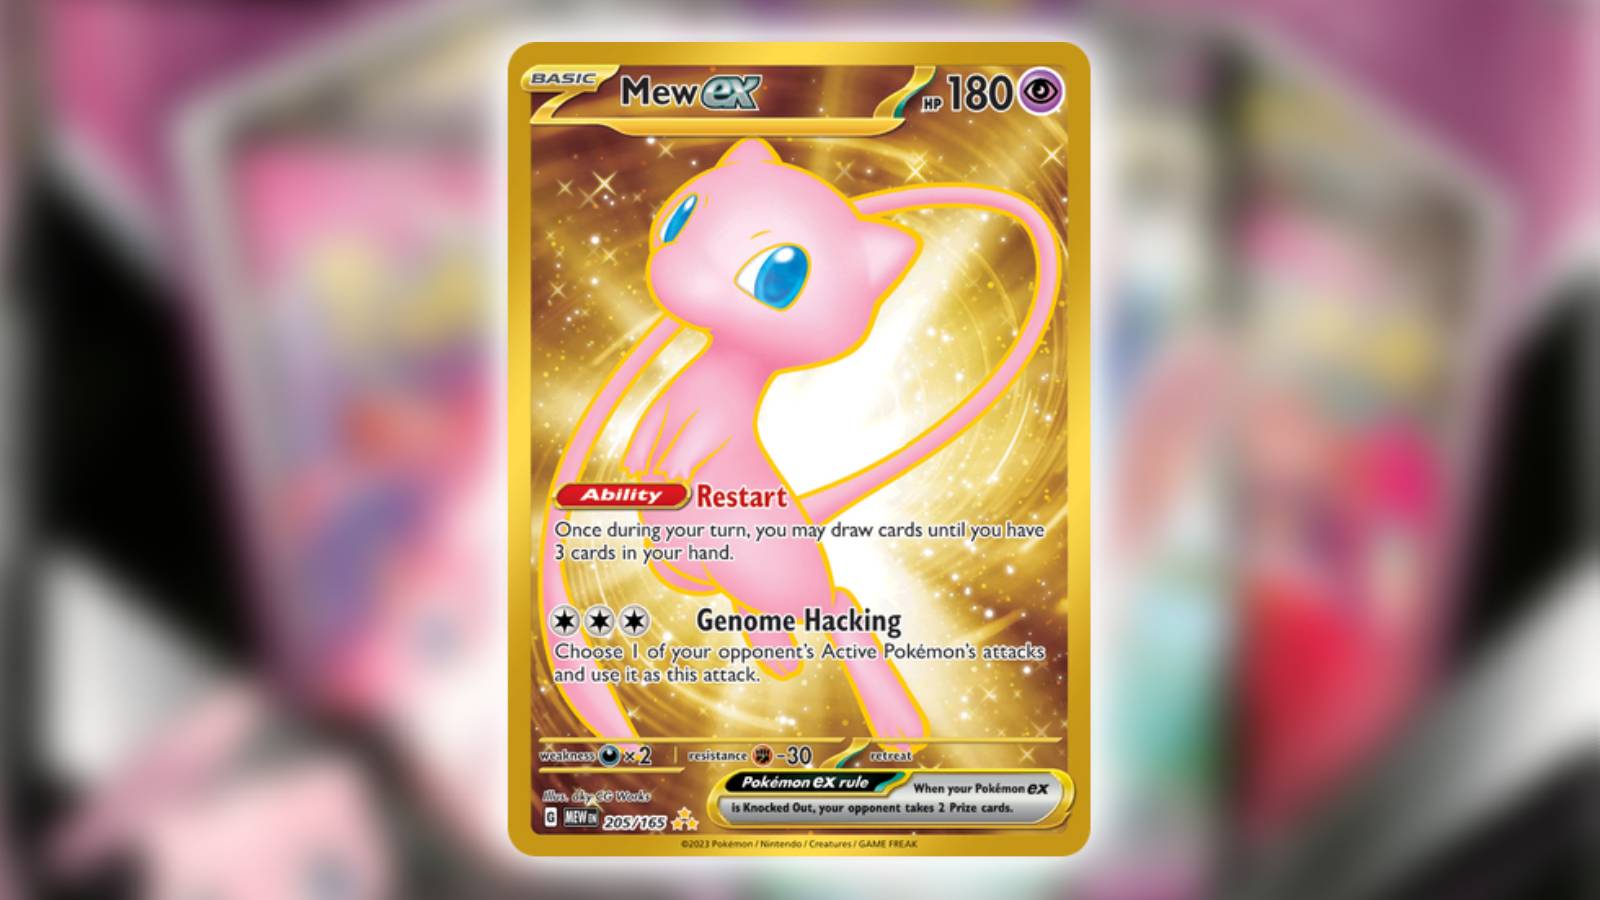 A gold Mew Ex card appears against a blurred background